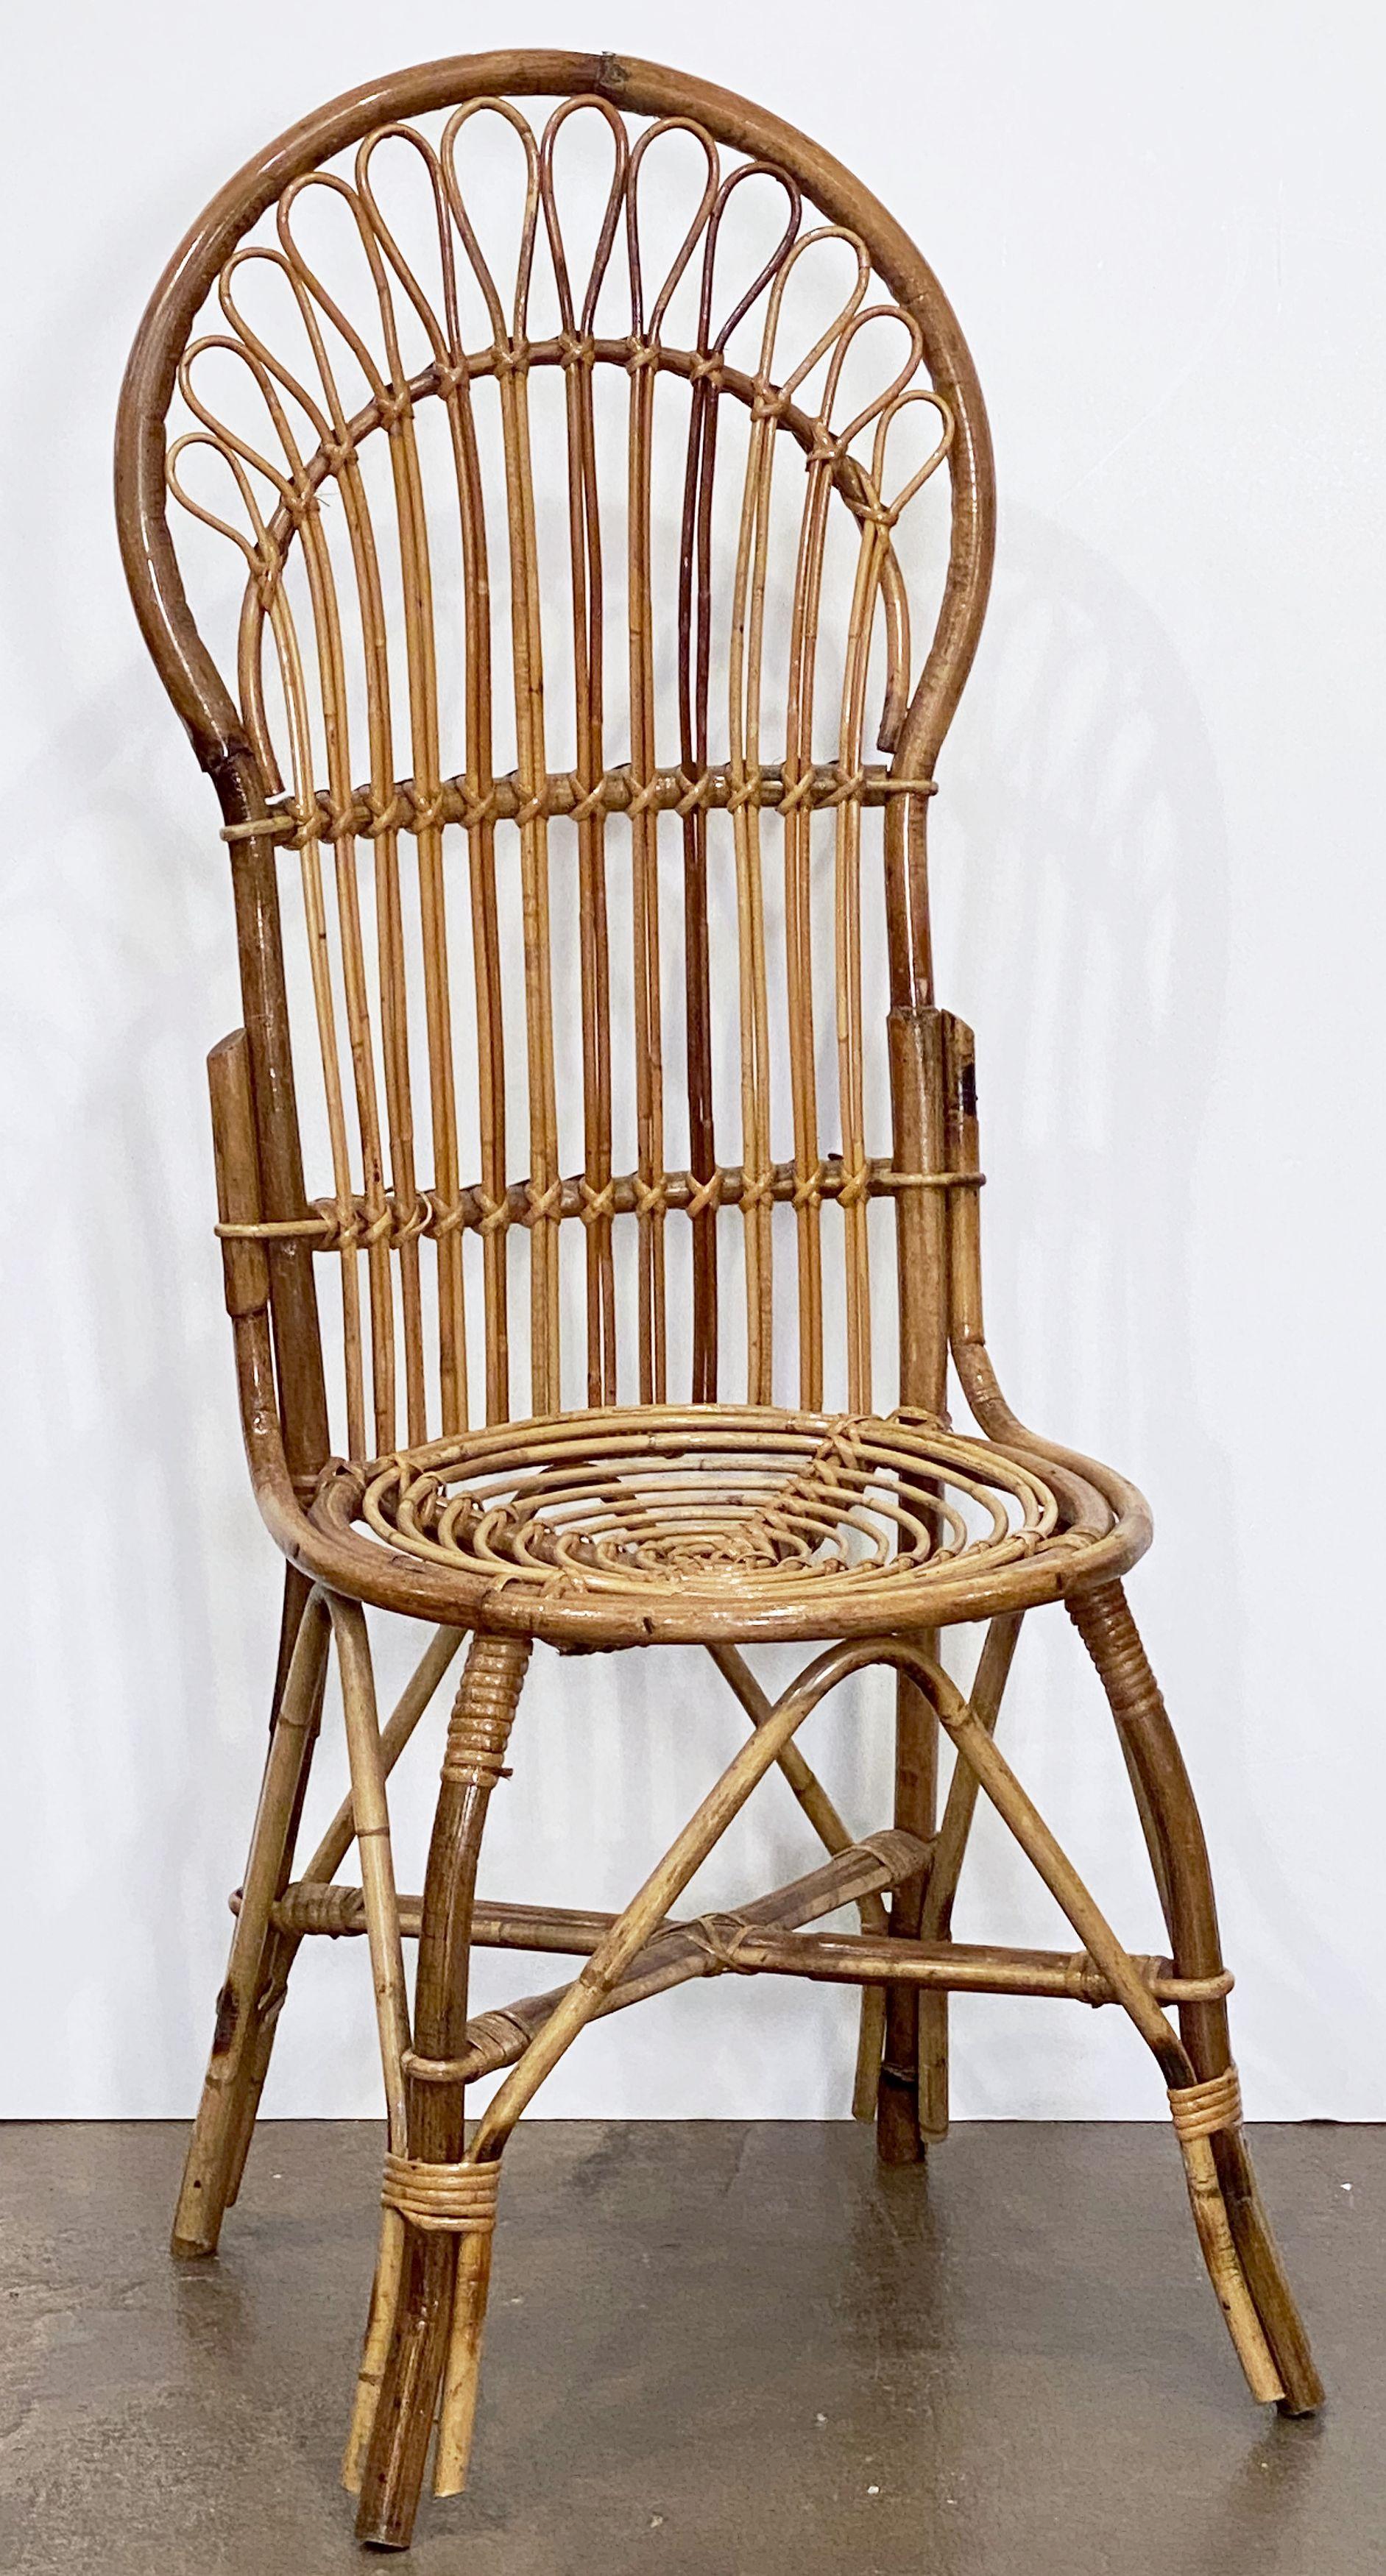 Mid-Century Modern Italian Fan-Backed Chair of Rattan and Bamboo from the Mid-20th Century For Sale